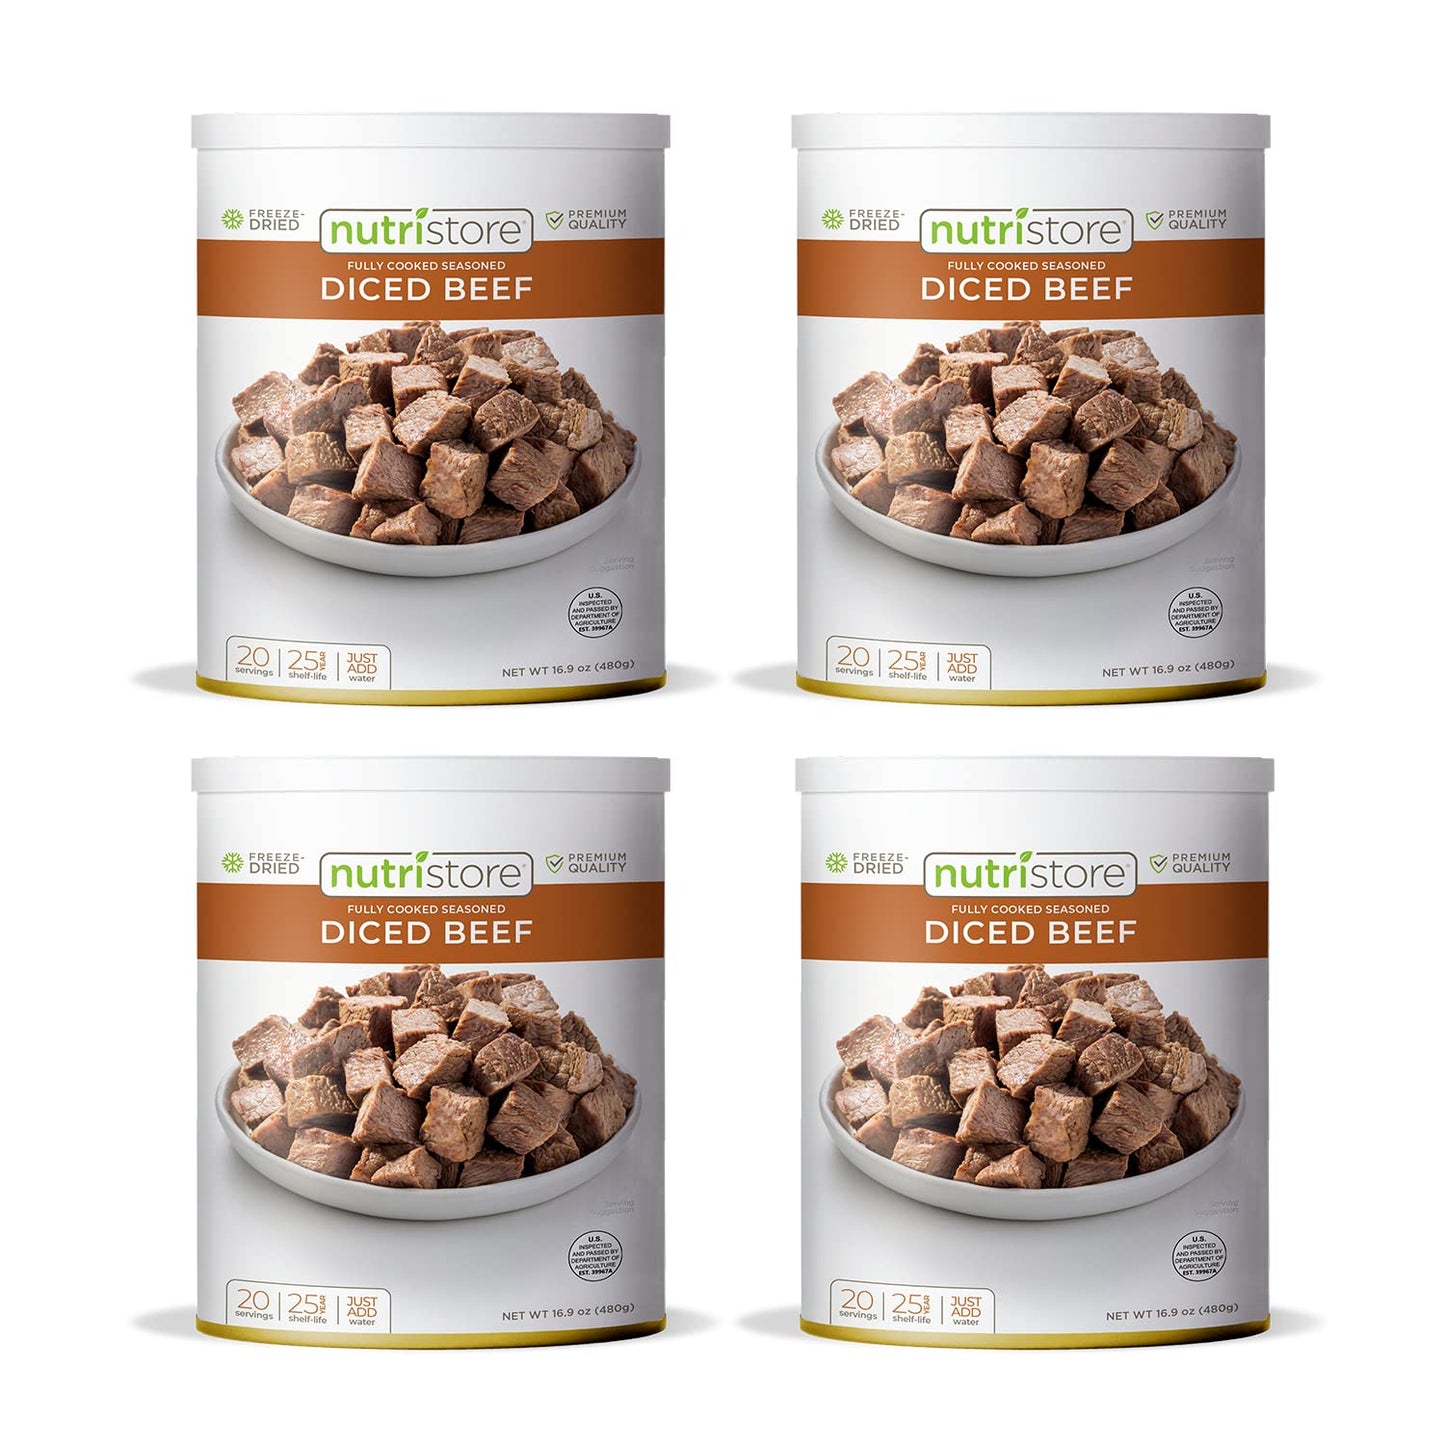 Nutristore Freeze Dried Beef Dices 4 cans | Pre-Cooked Meat